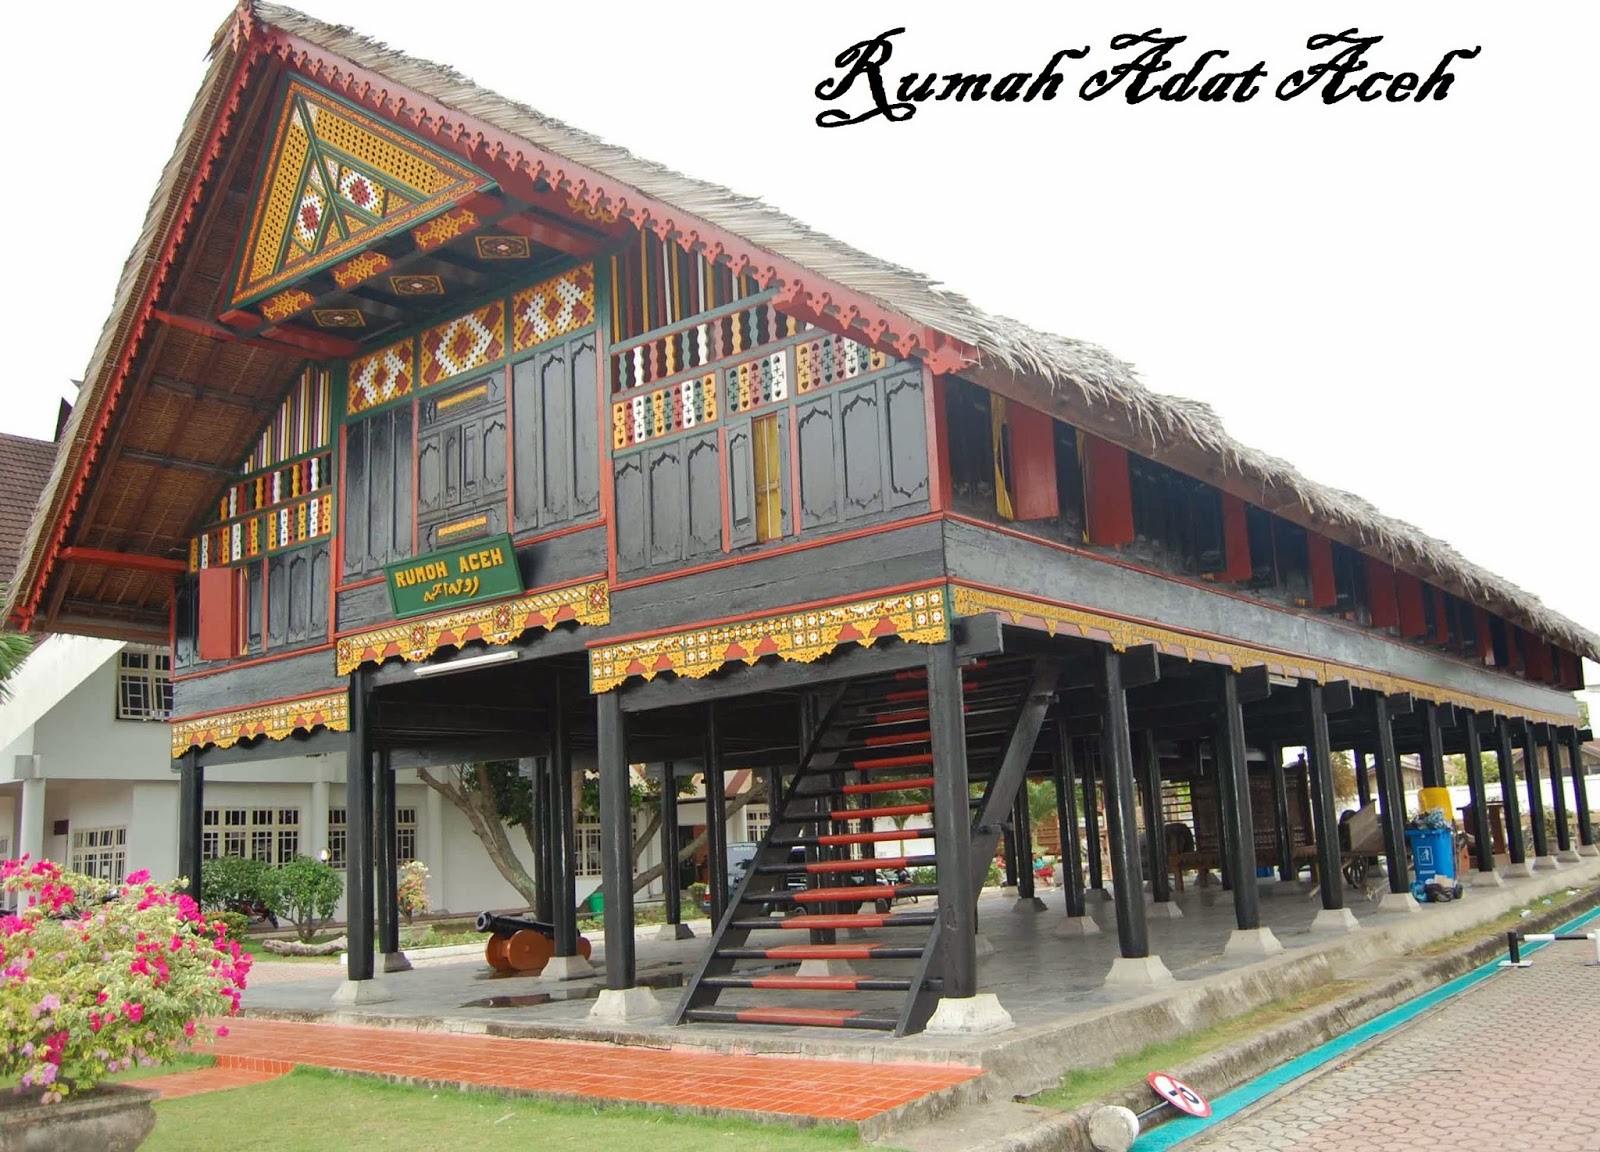 Download this Rumah Adat Aceh picture